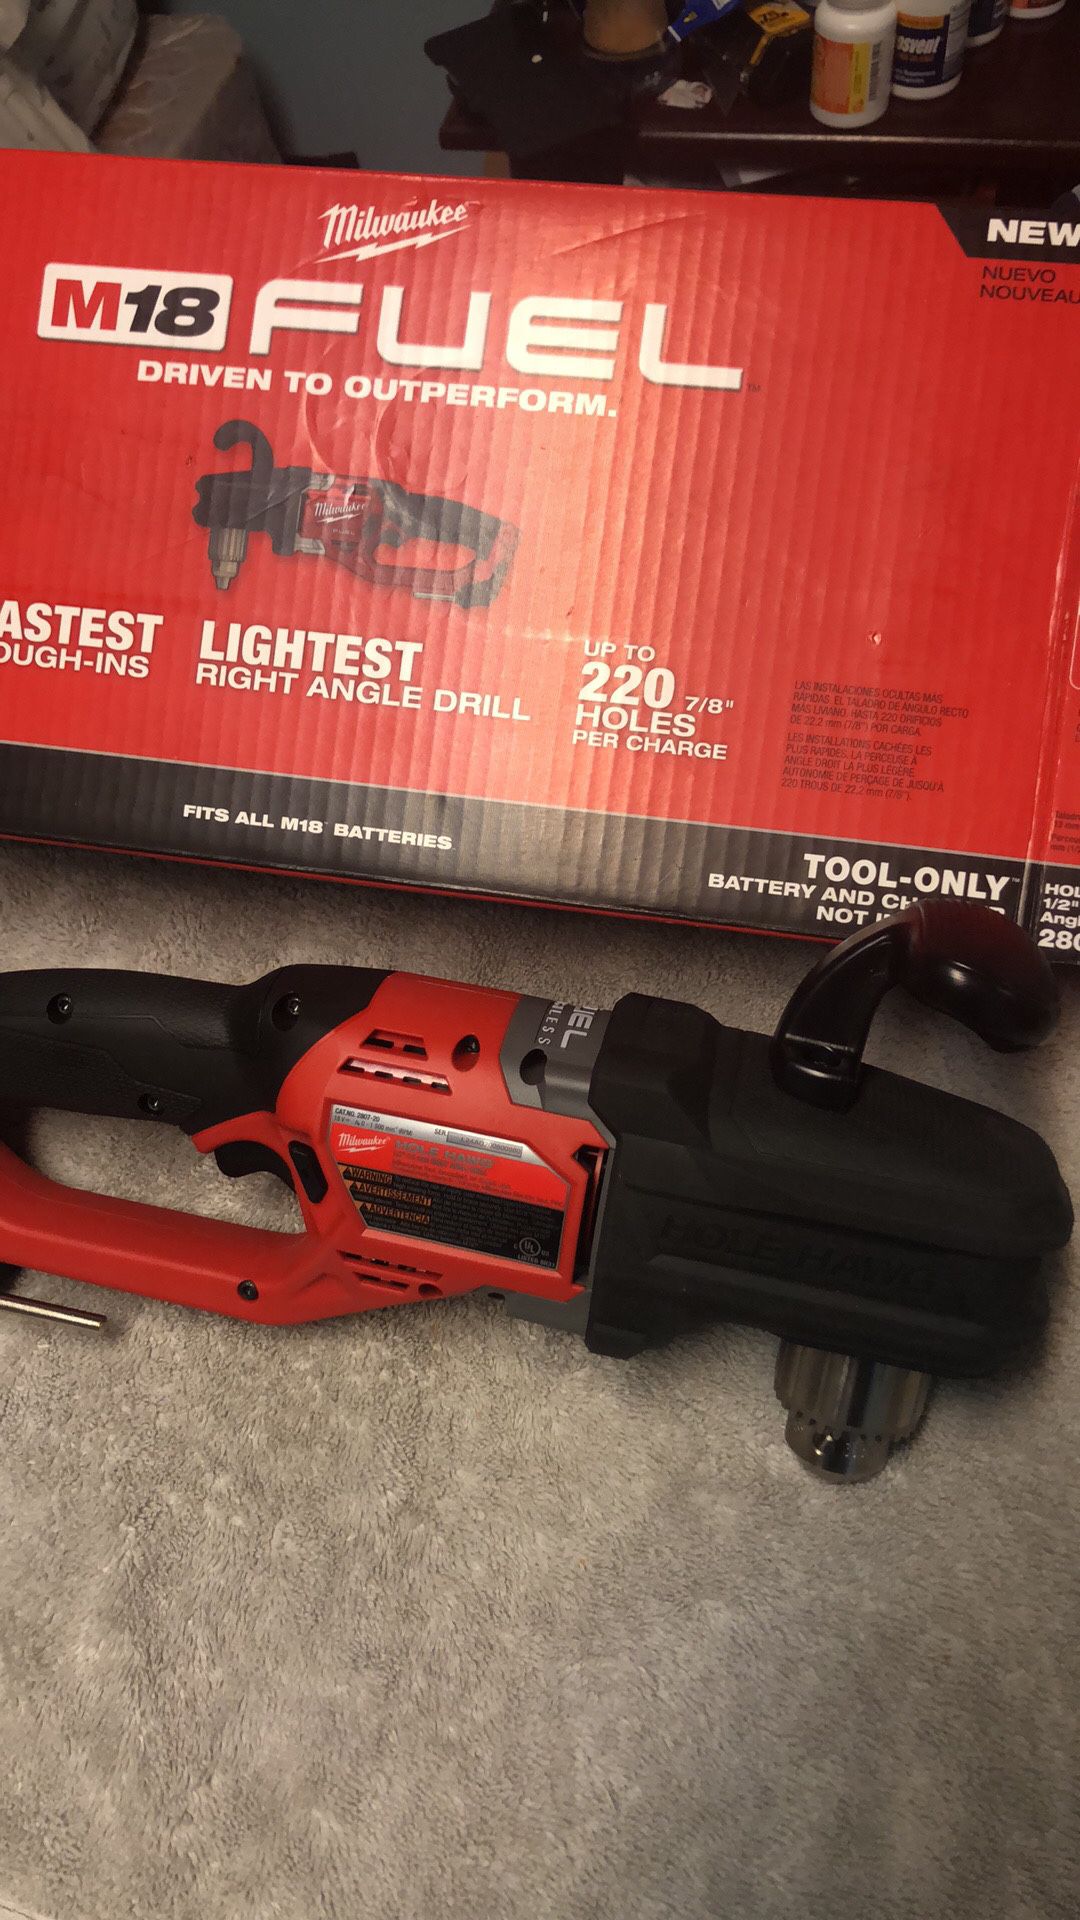 Angle drill Milwaukee fuel only tools